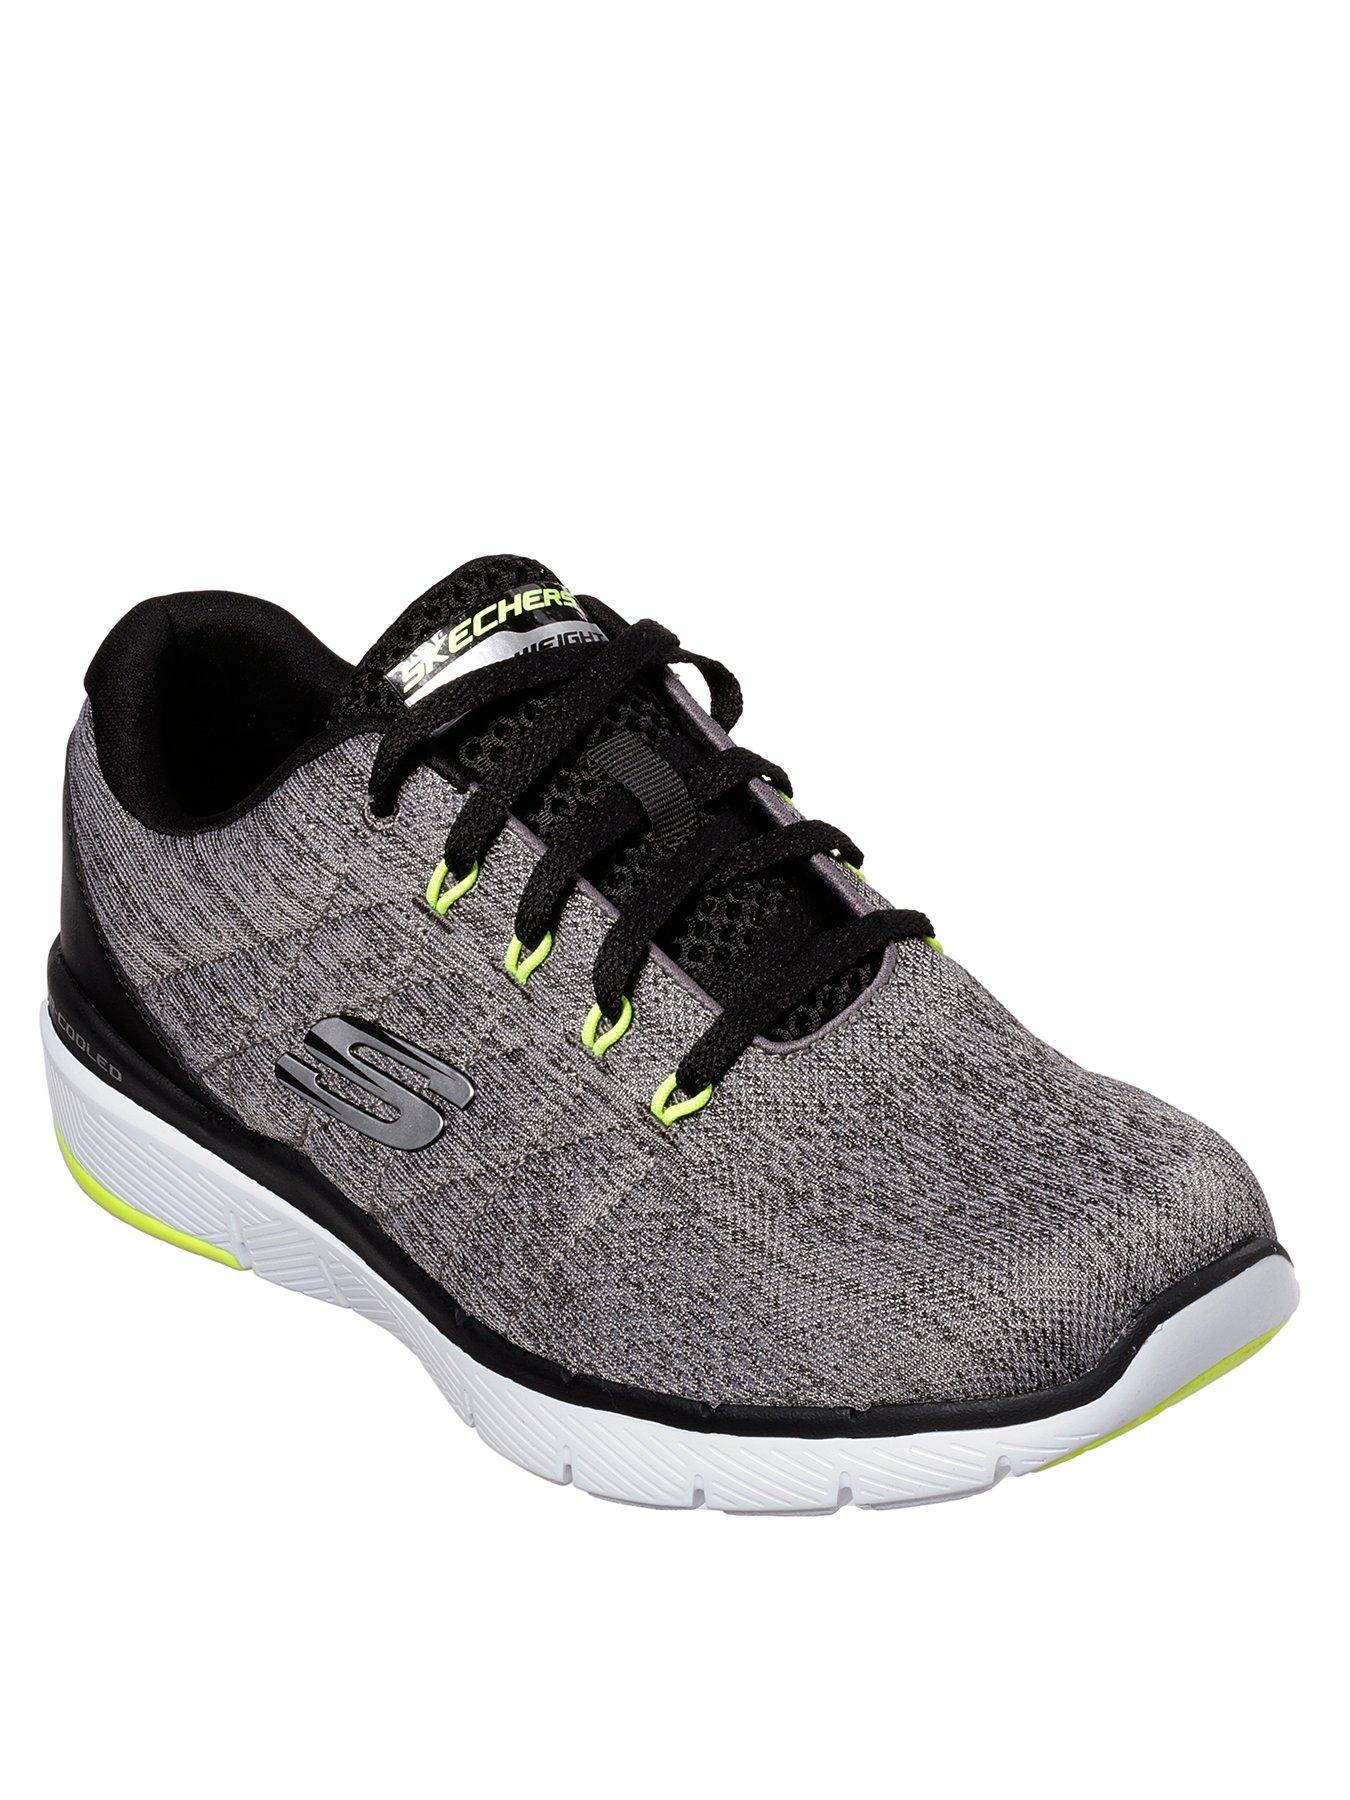 skechers with air cooled memory foam